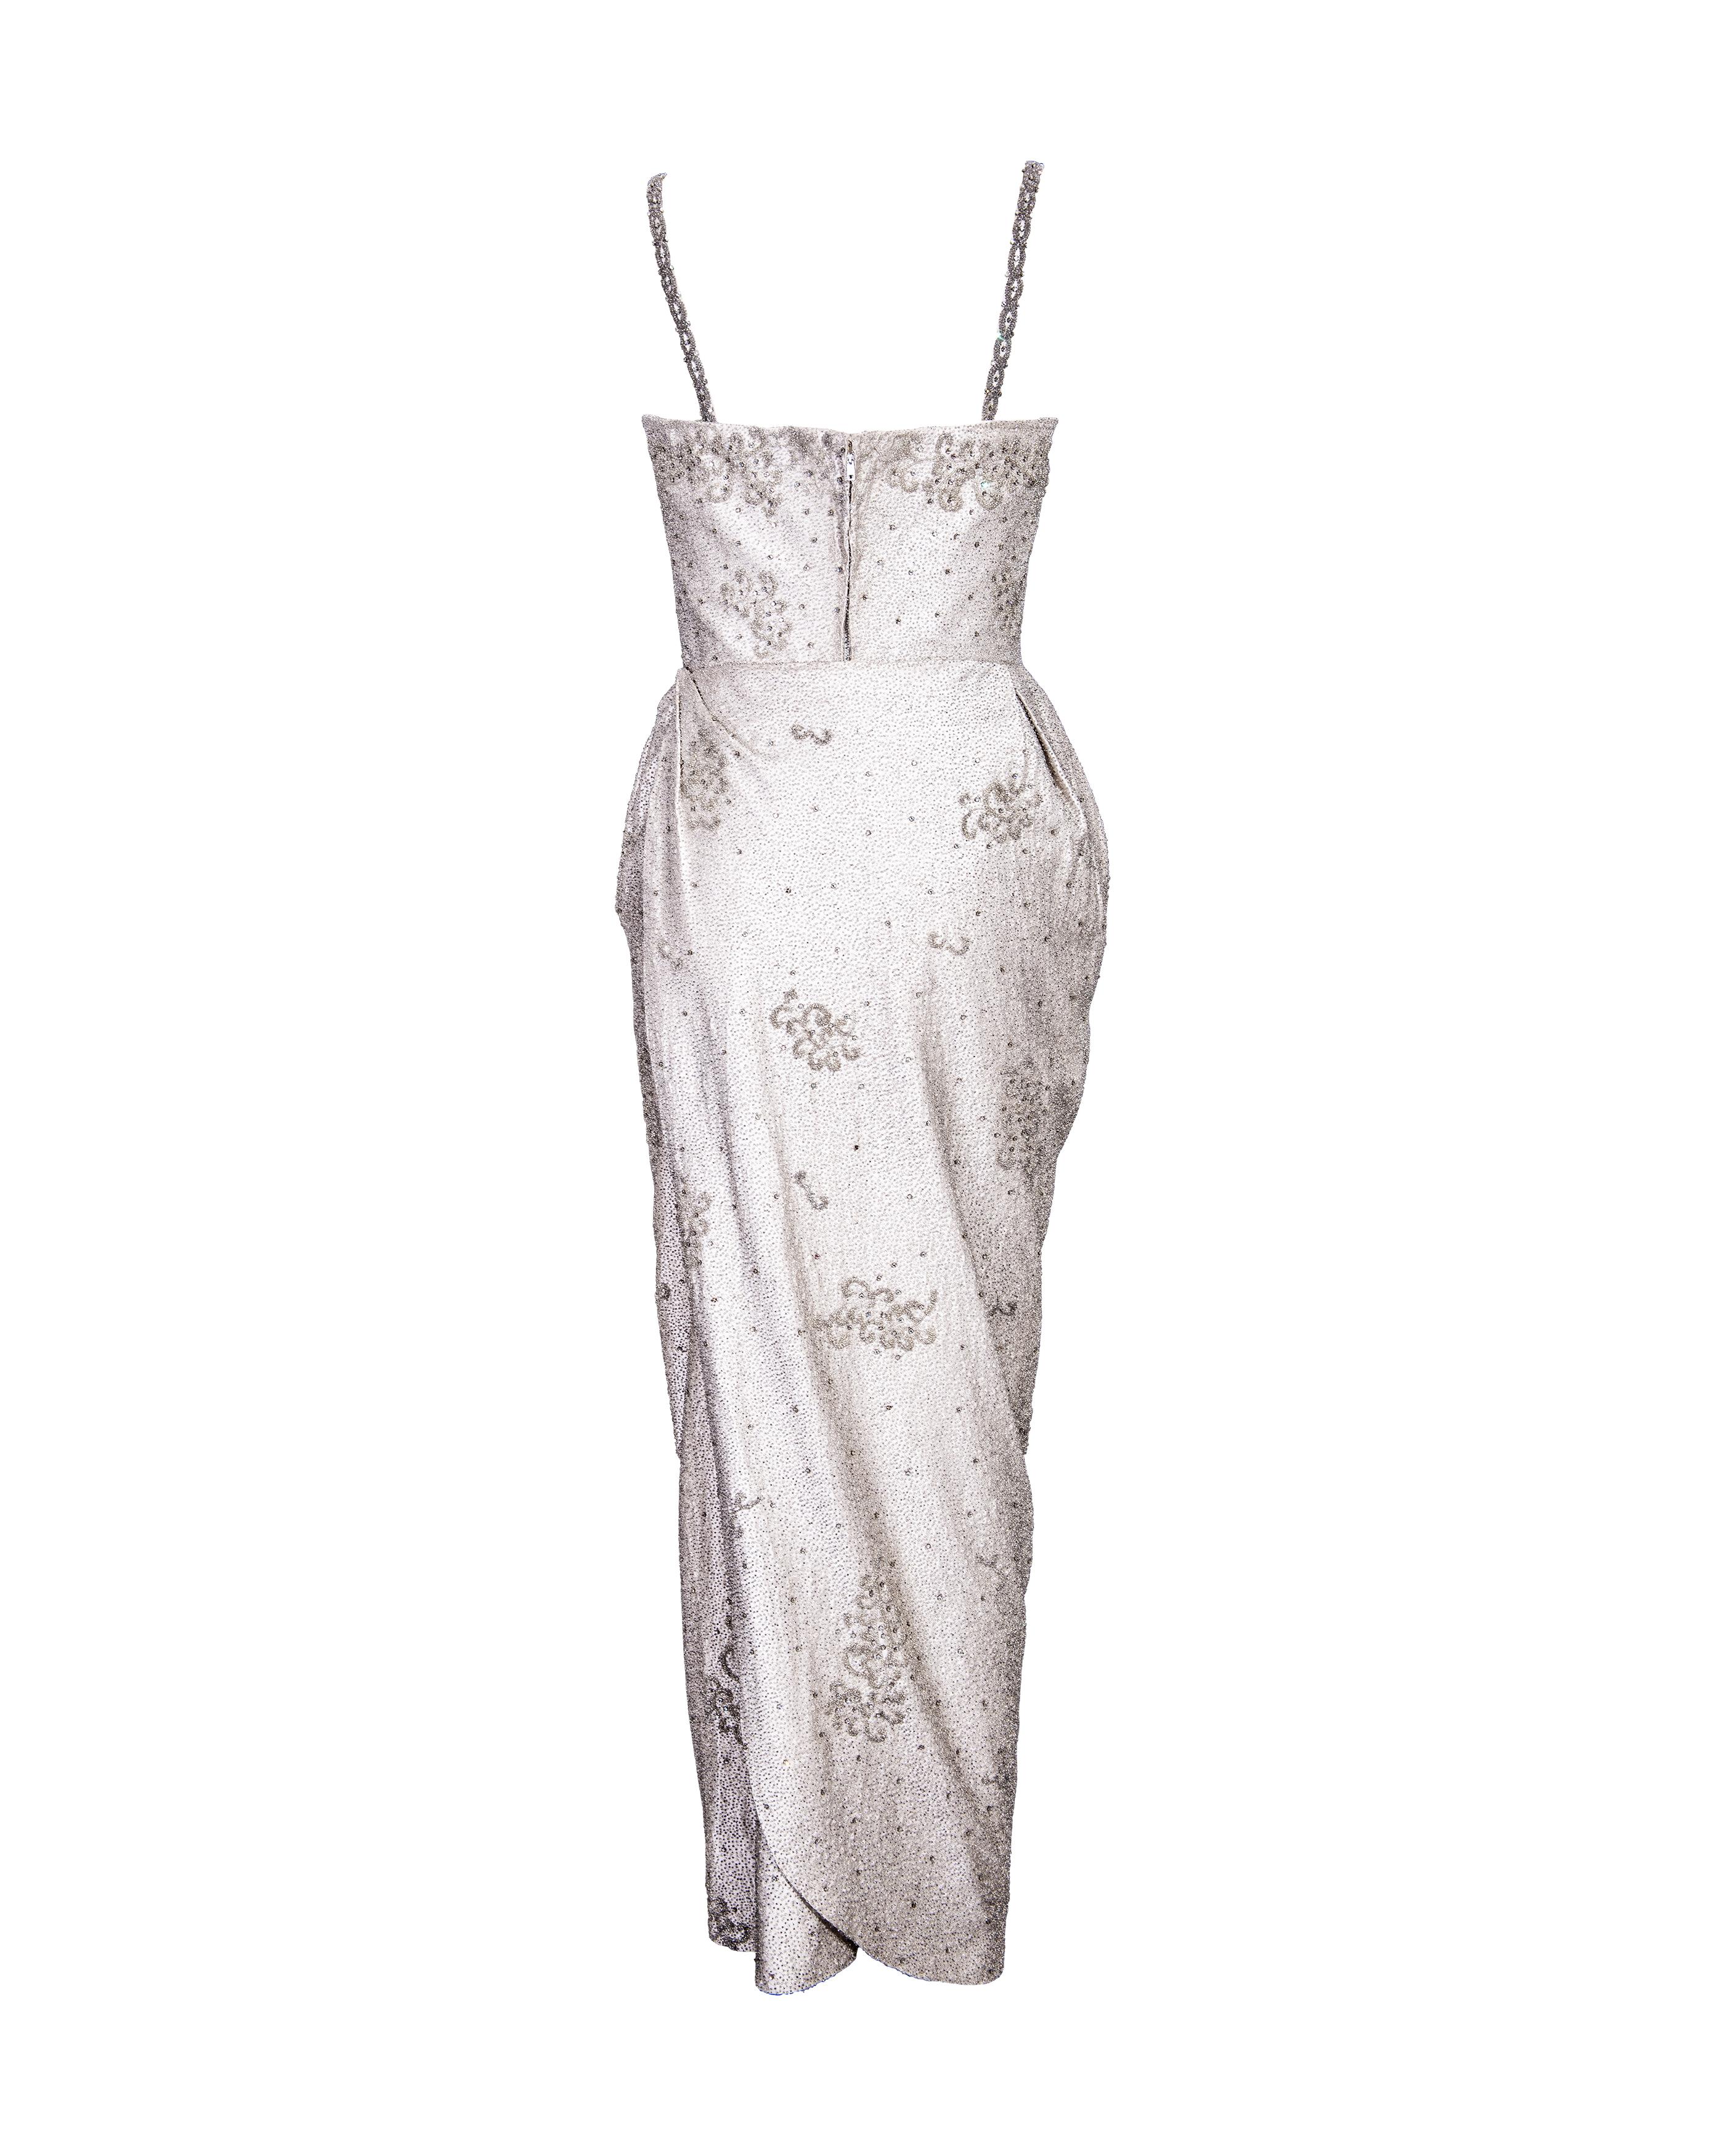 Women's c. 1958 Pirovano Pale Gray Fully Embellished Gown with Filigree Details